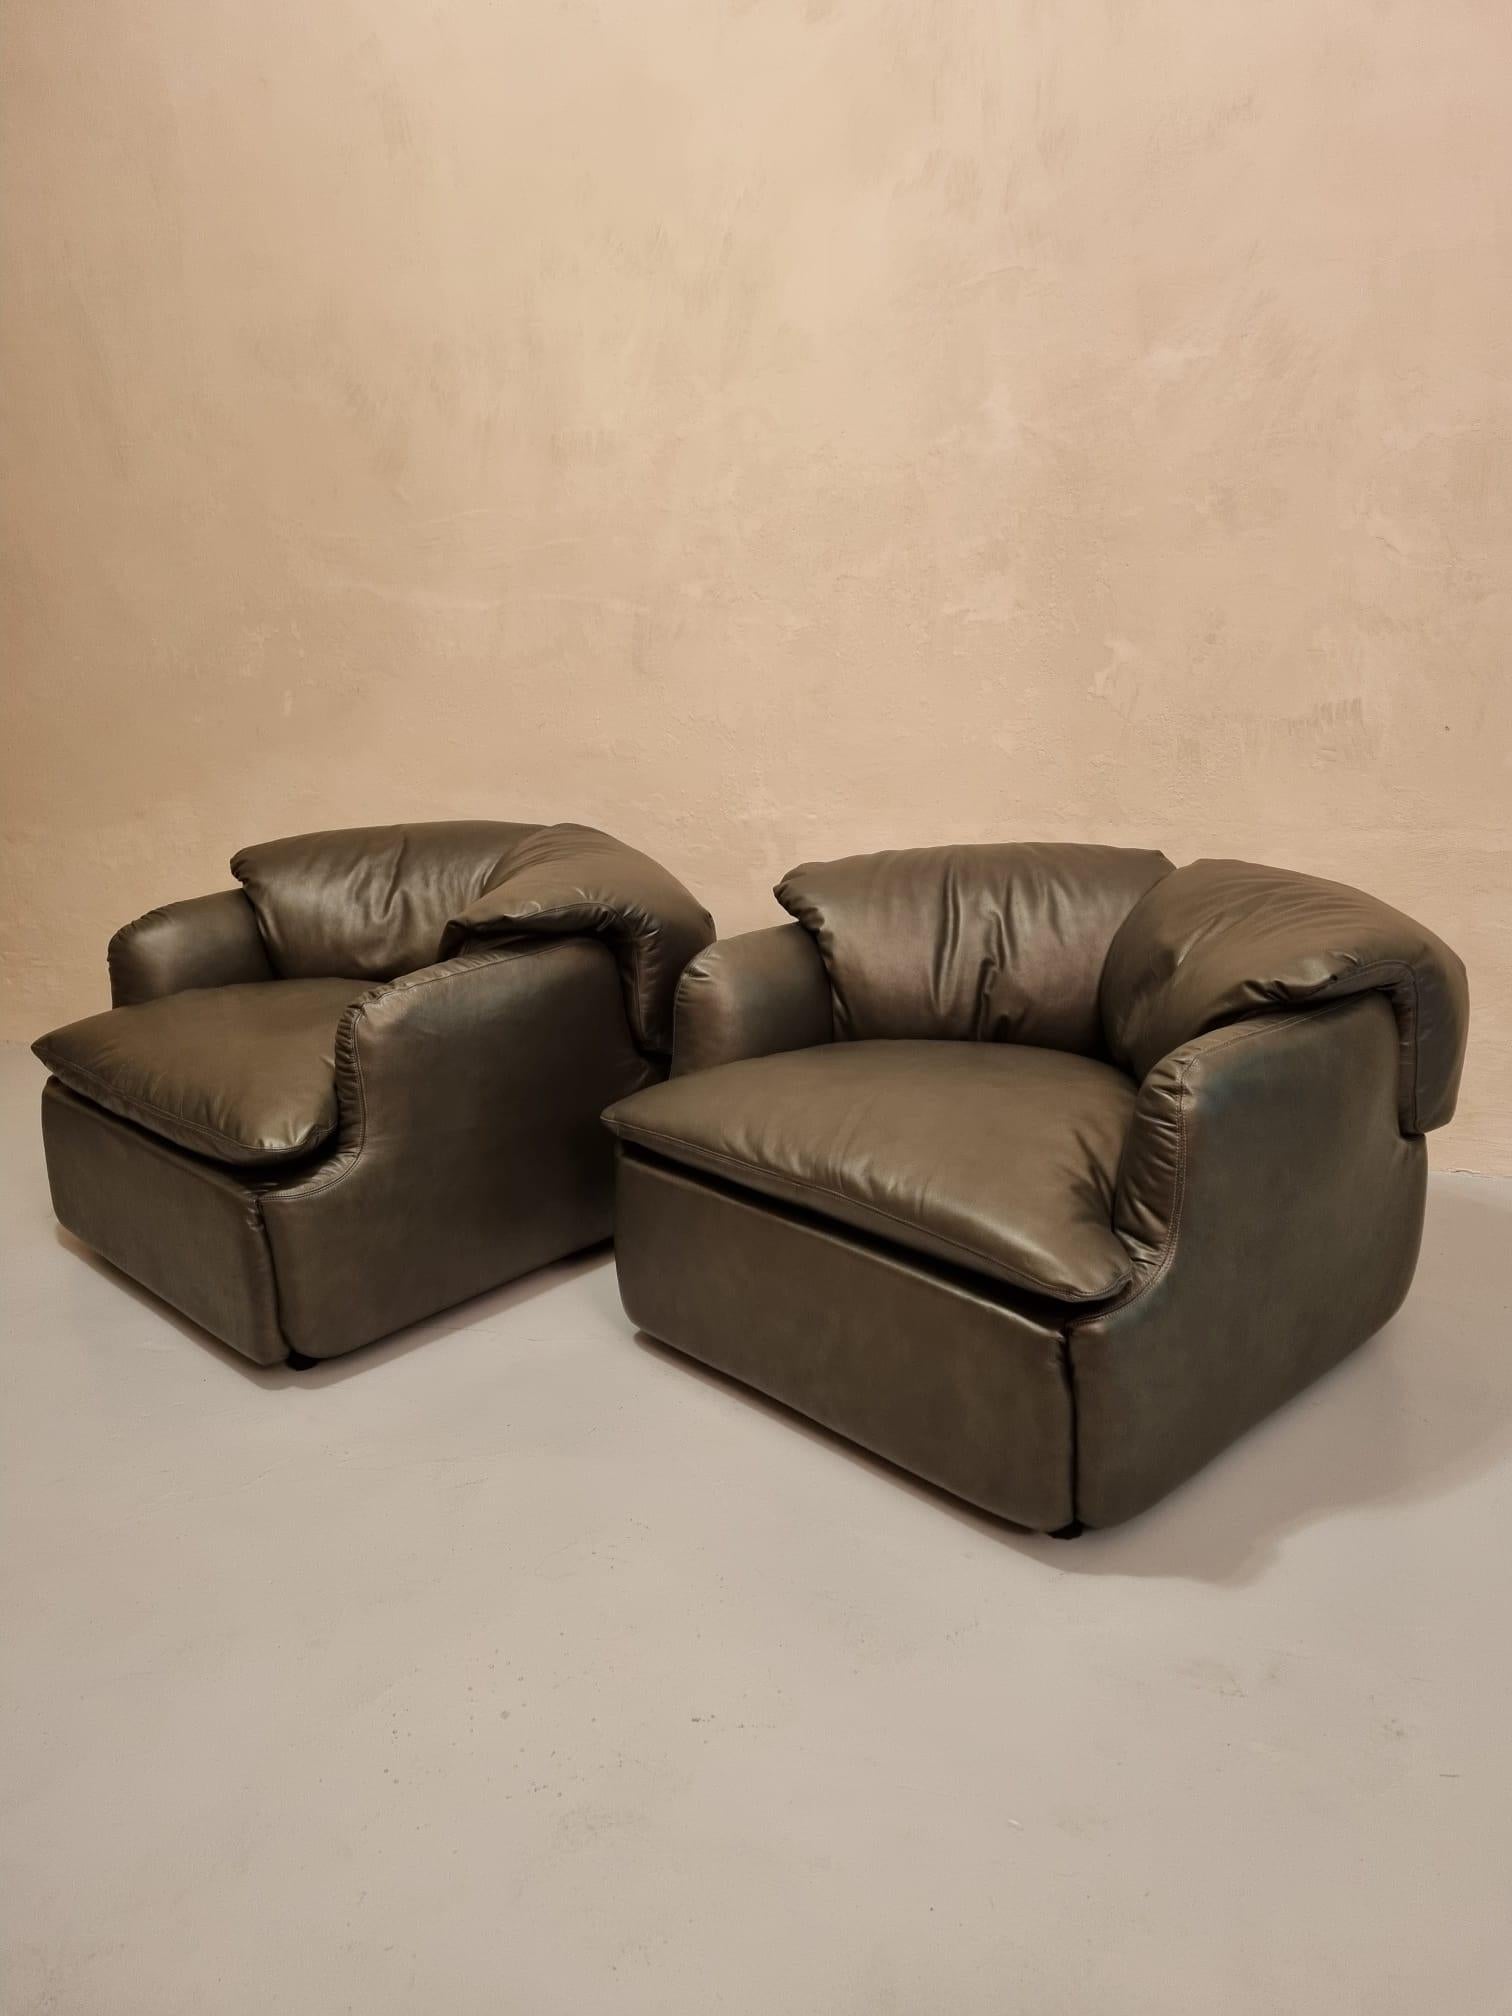 Confidential Armchairs designed by Alberto rosselli for Saporiti Italia, 1970s, polyurethane foam, black cowhide metallic effect.
The Confidential  is one of the most important products of the Saporiti Italia history. Designed by Alberto Rosselli in